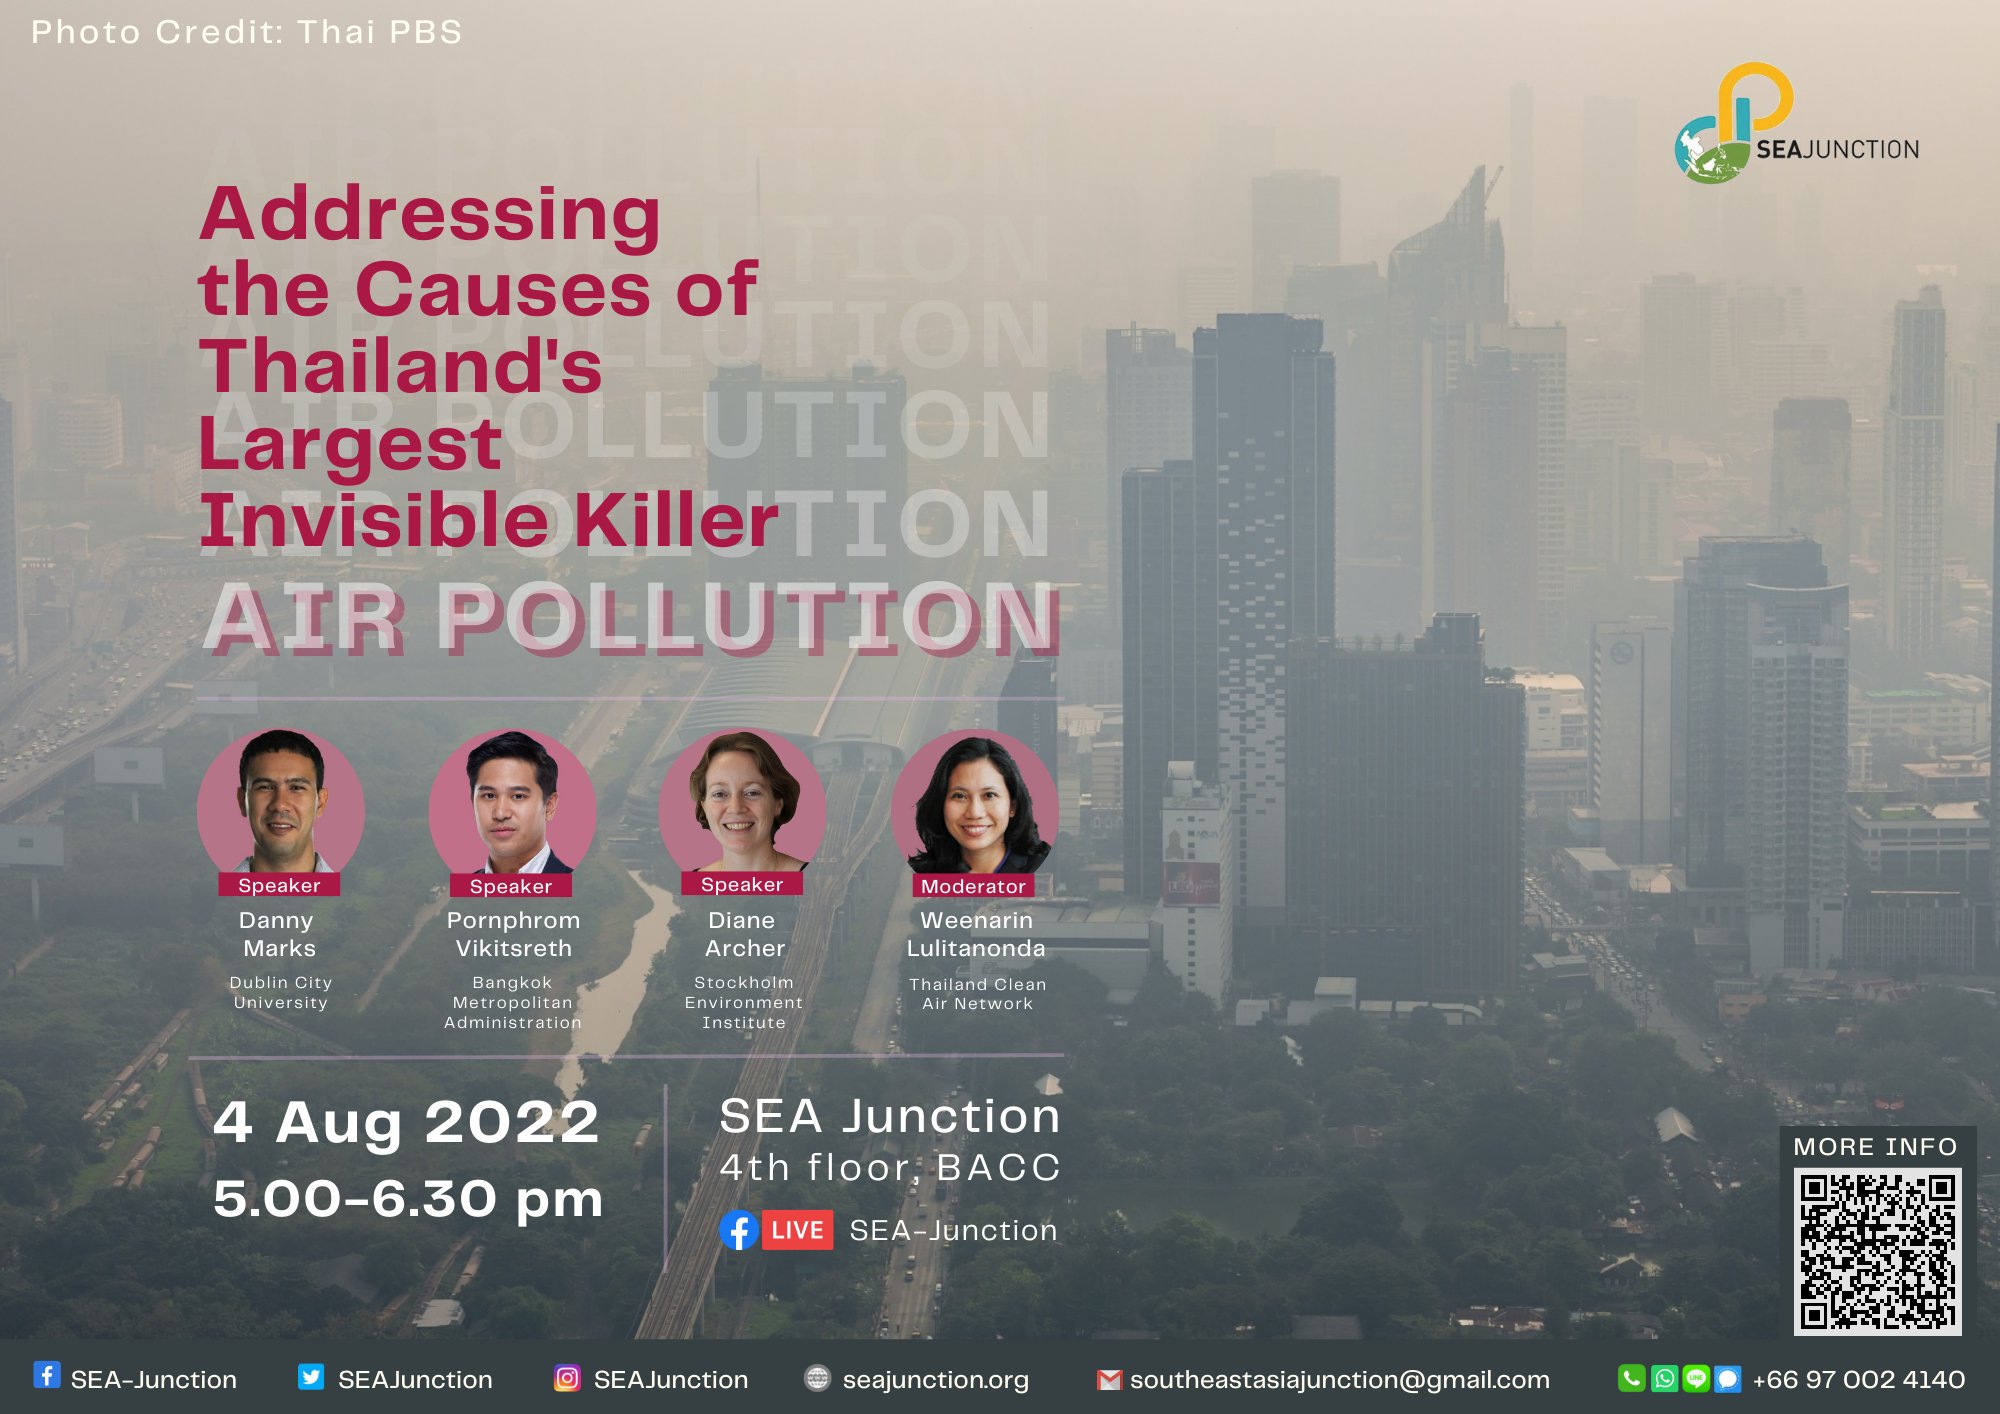 Addressing the causes of Thailand's largest invisible killer air